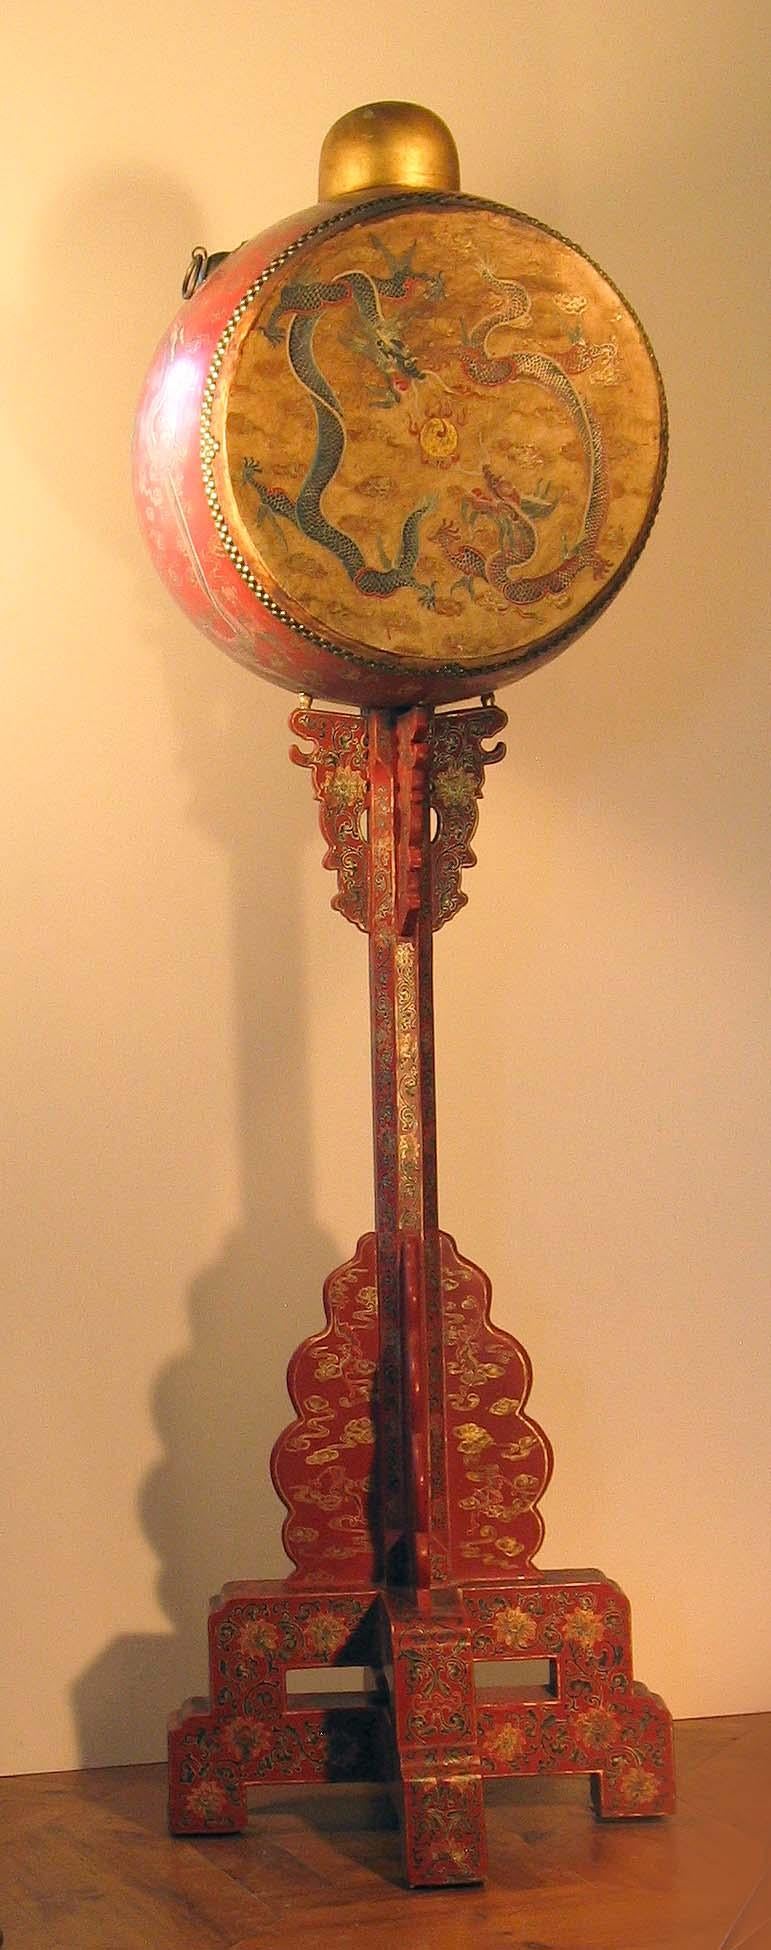 Lacquered Rare 6 ft. Tall Chinese Ceremonial Lacquer Drum and Stand, 19th Century